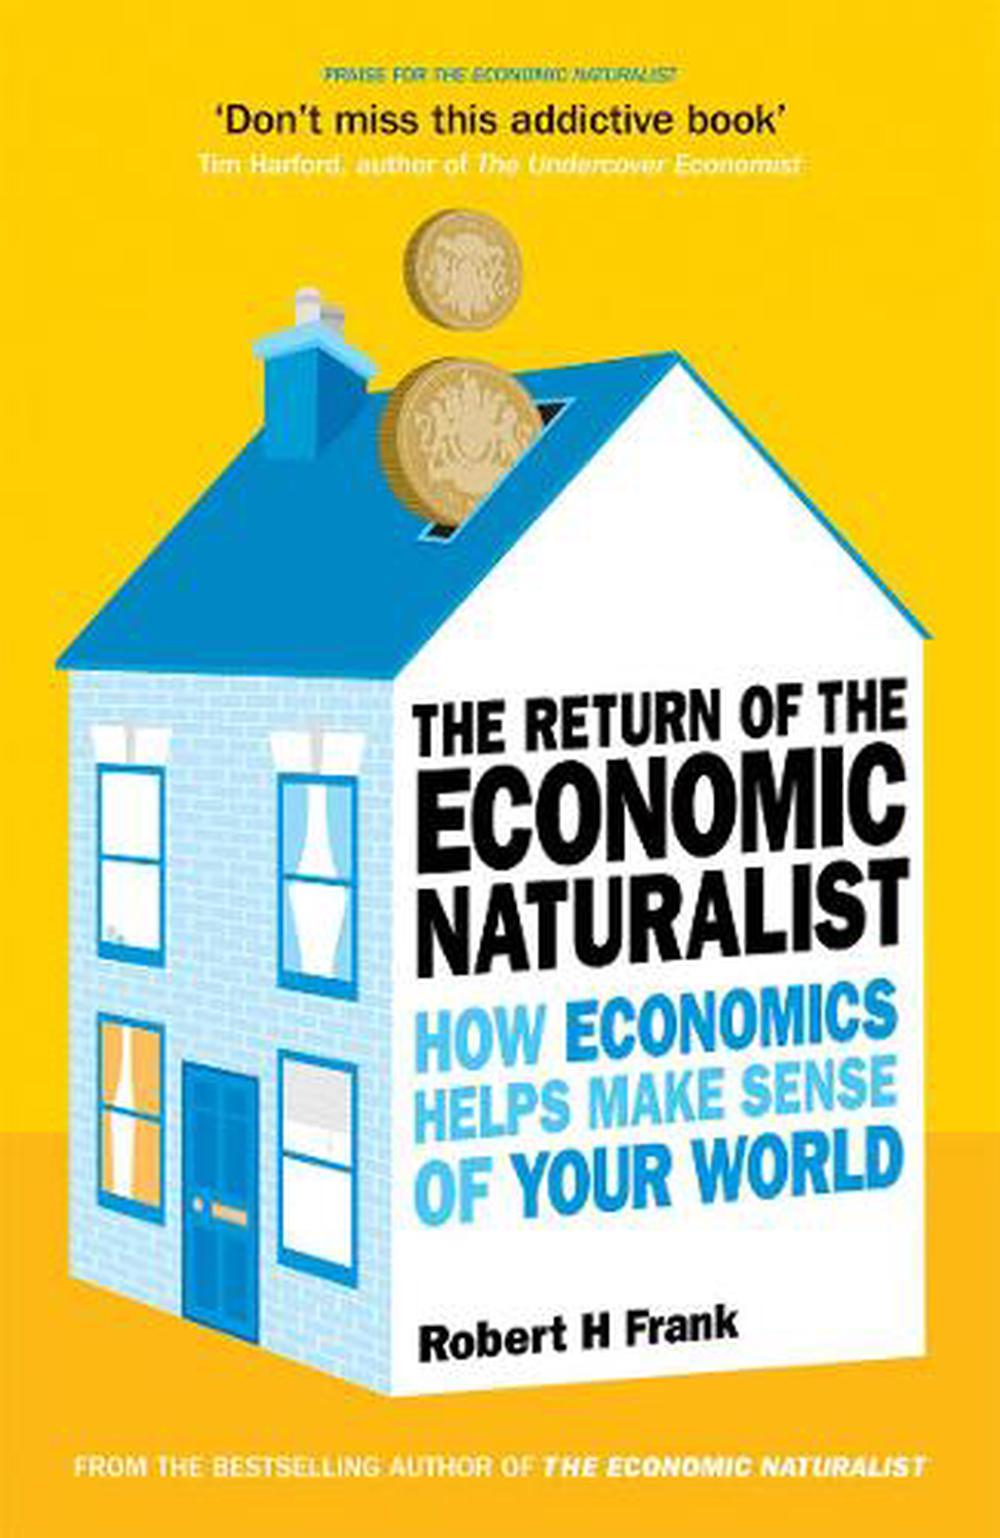 economic naturalist writing assignment examples